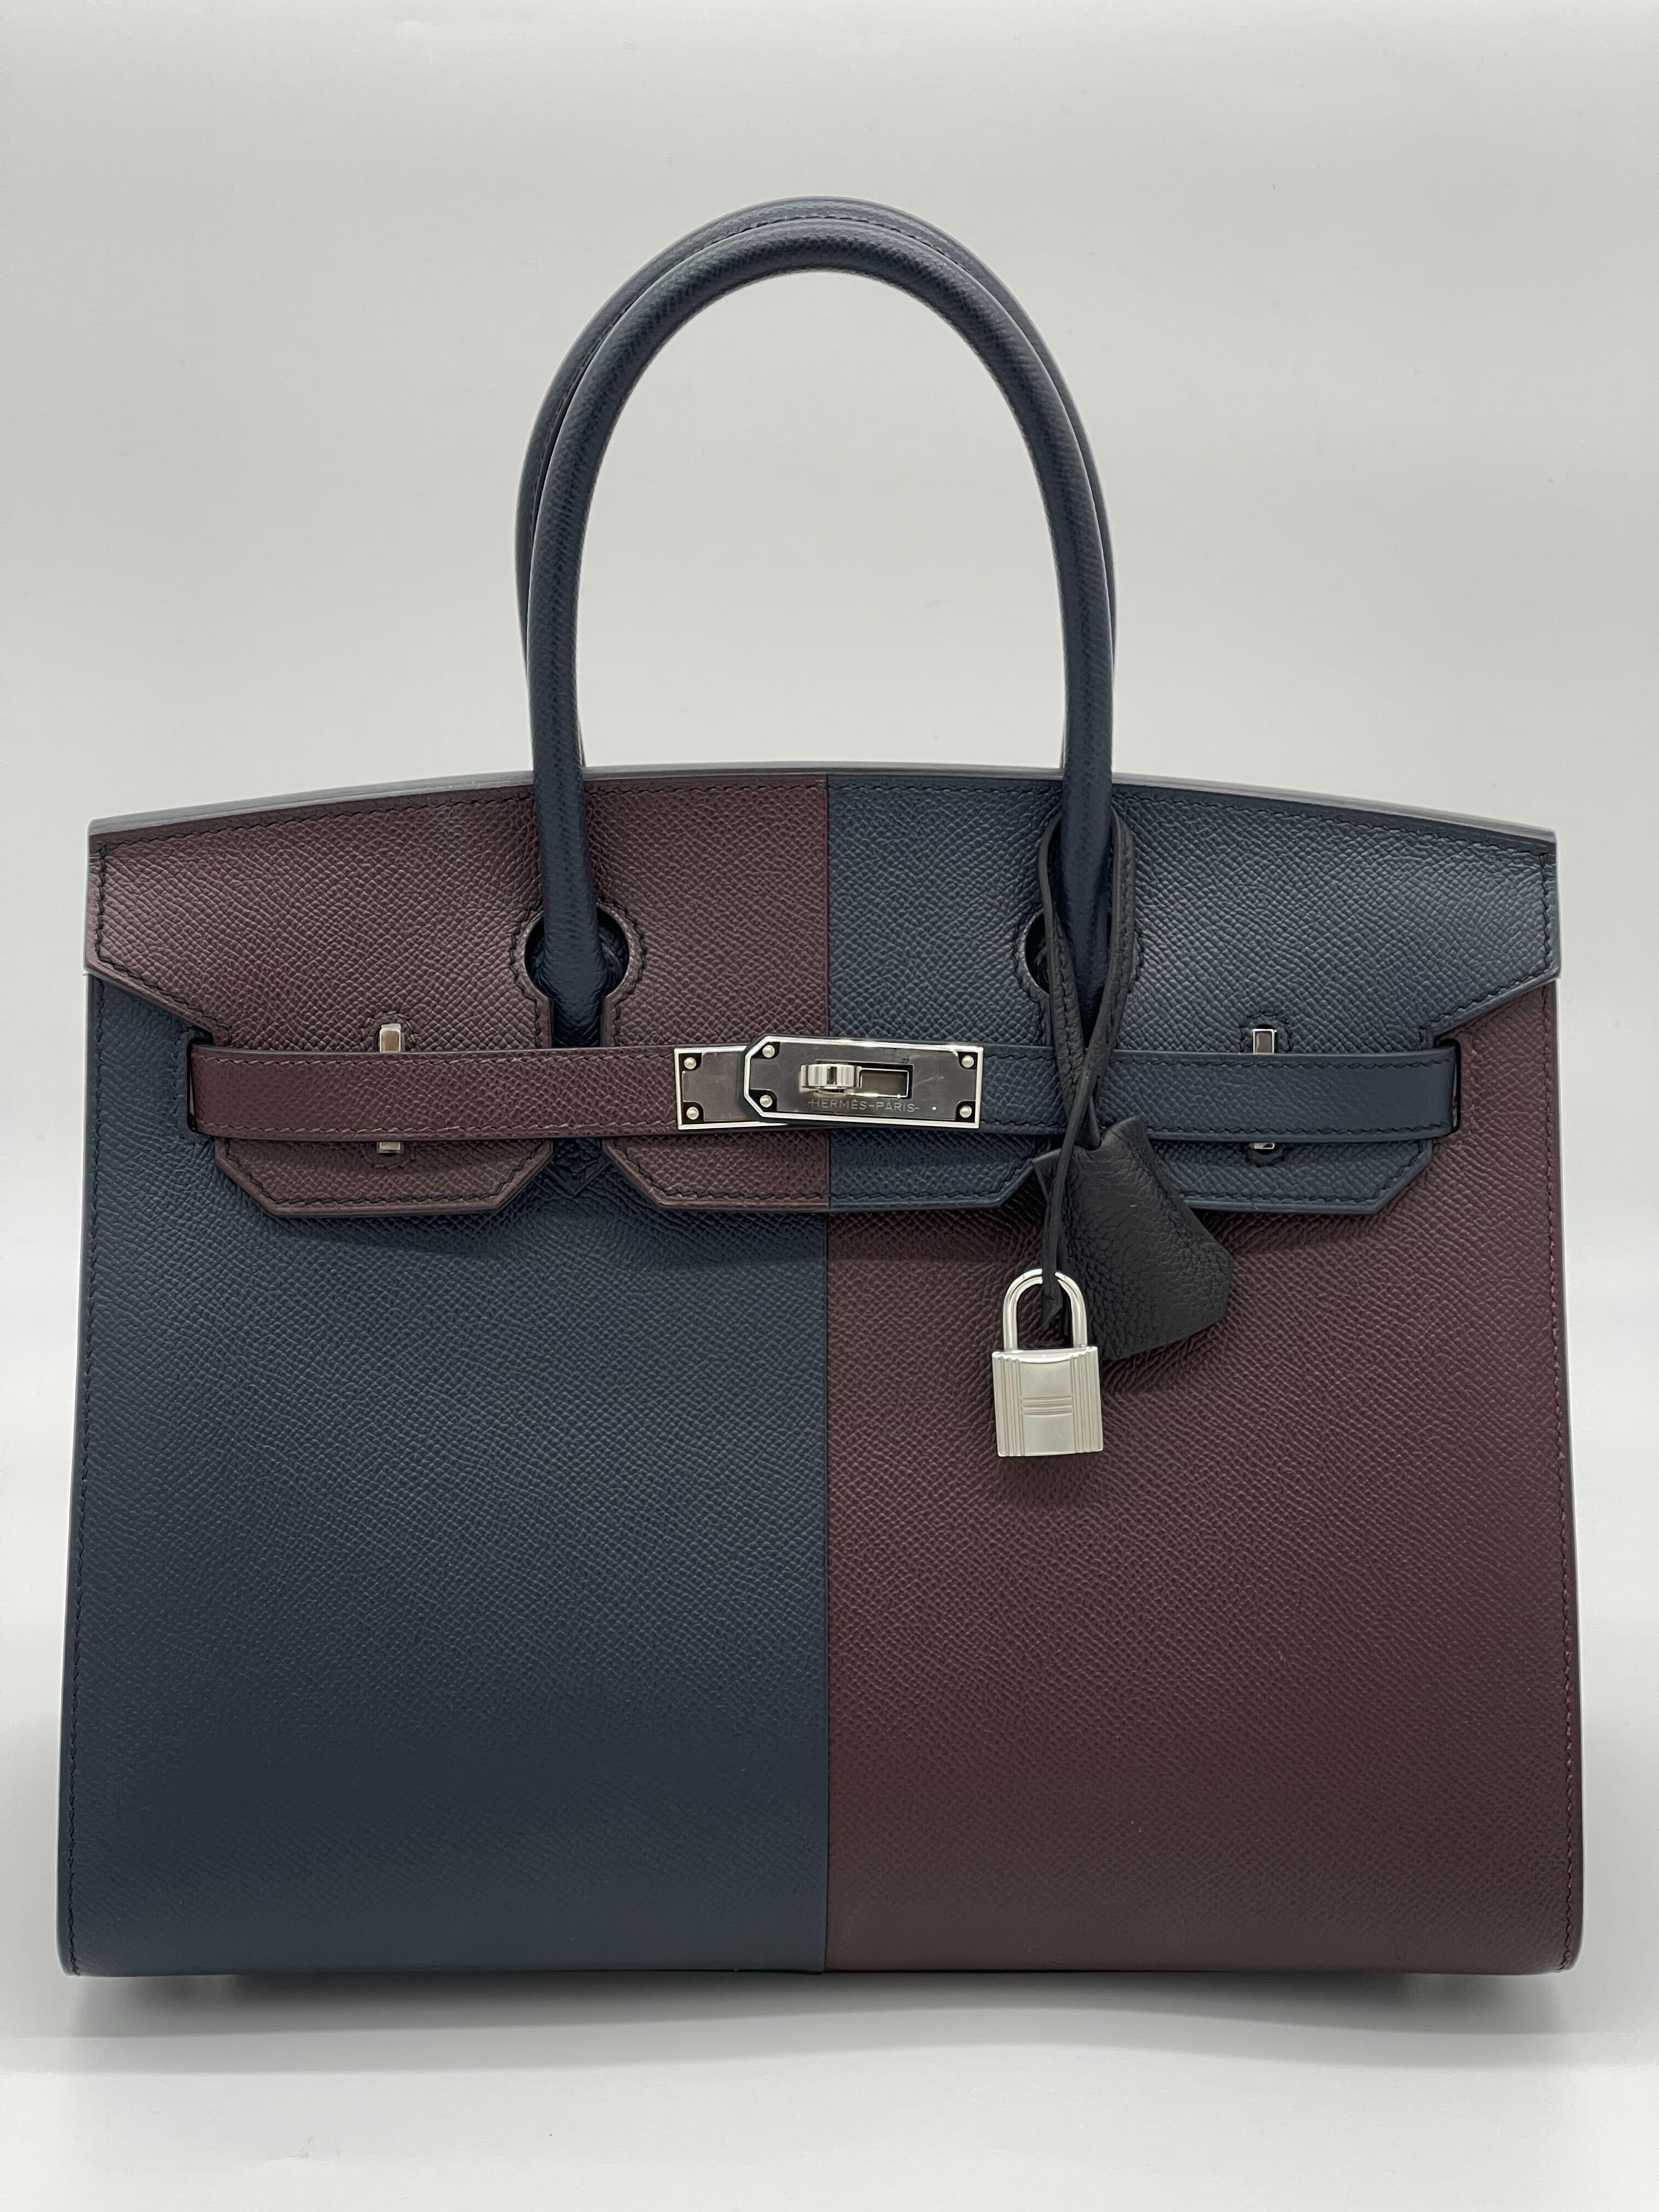 Hermès Birkin 30 Tri-Toned Casaque Rouge Sellier / Bleu Indigo / Rose Texas Epsom Leather Palladium Hardware

Condition & Year: New 2022
Measurements: 11.5” W x 9” H x 6” D
Material: Epsom Leather
Hardware: Palladium plated

*Comes with full